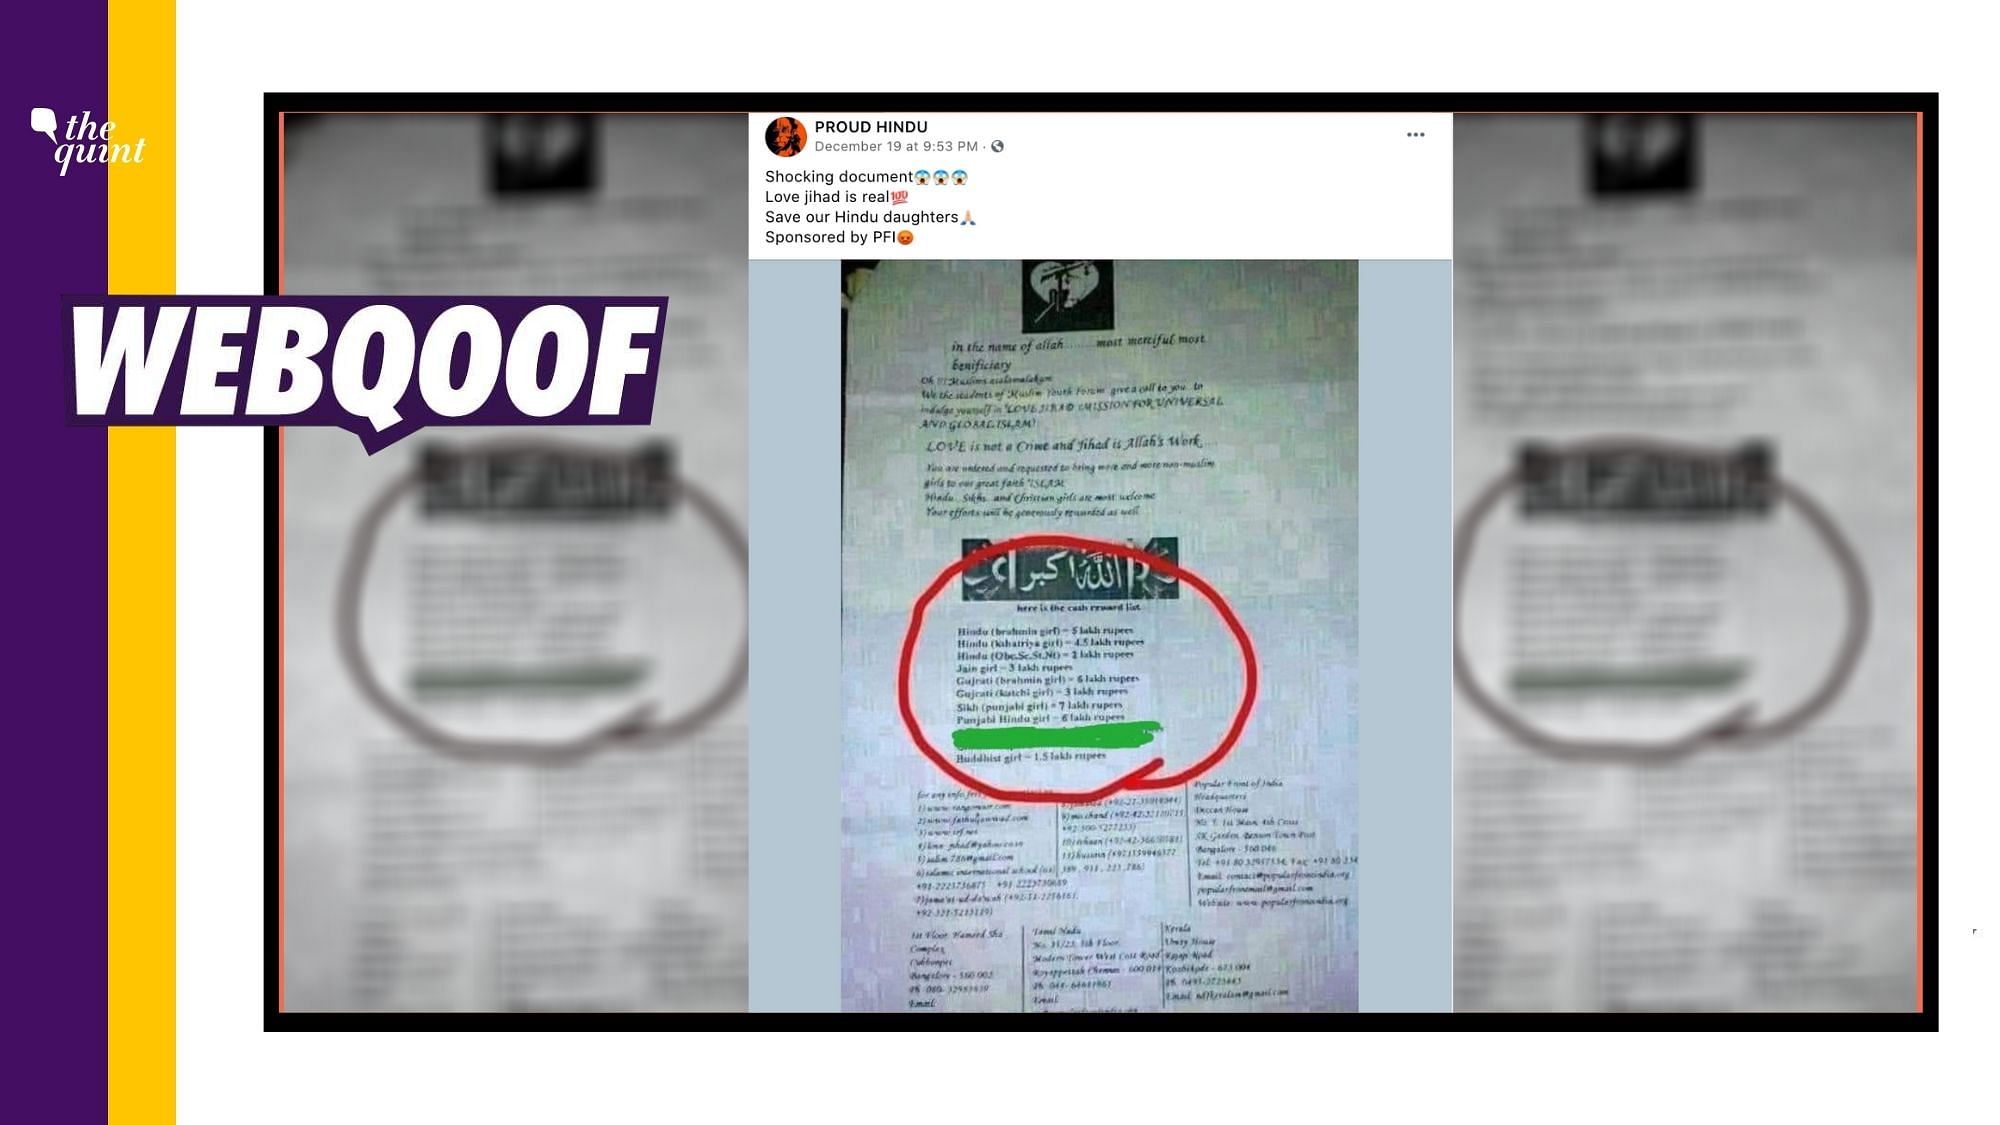 An old pamphlet showing an alleged rate list of non-Muslim women was revived to falsely claim that it has been issued by PFI.